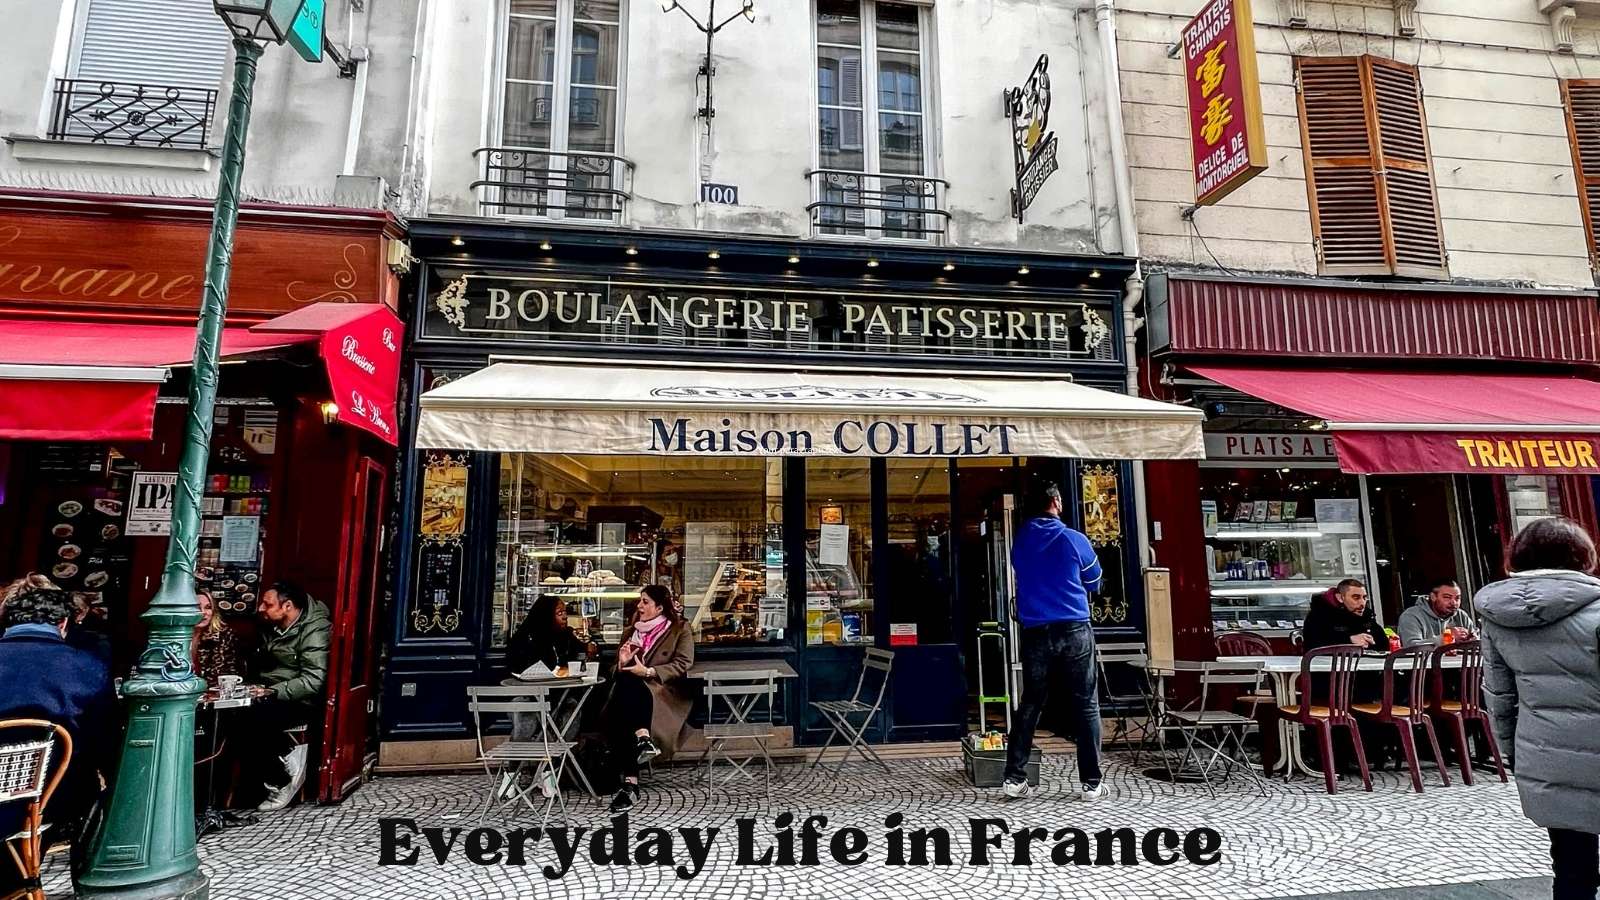 Pastry shop in Paris: Everyday life in France episode